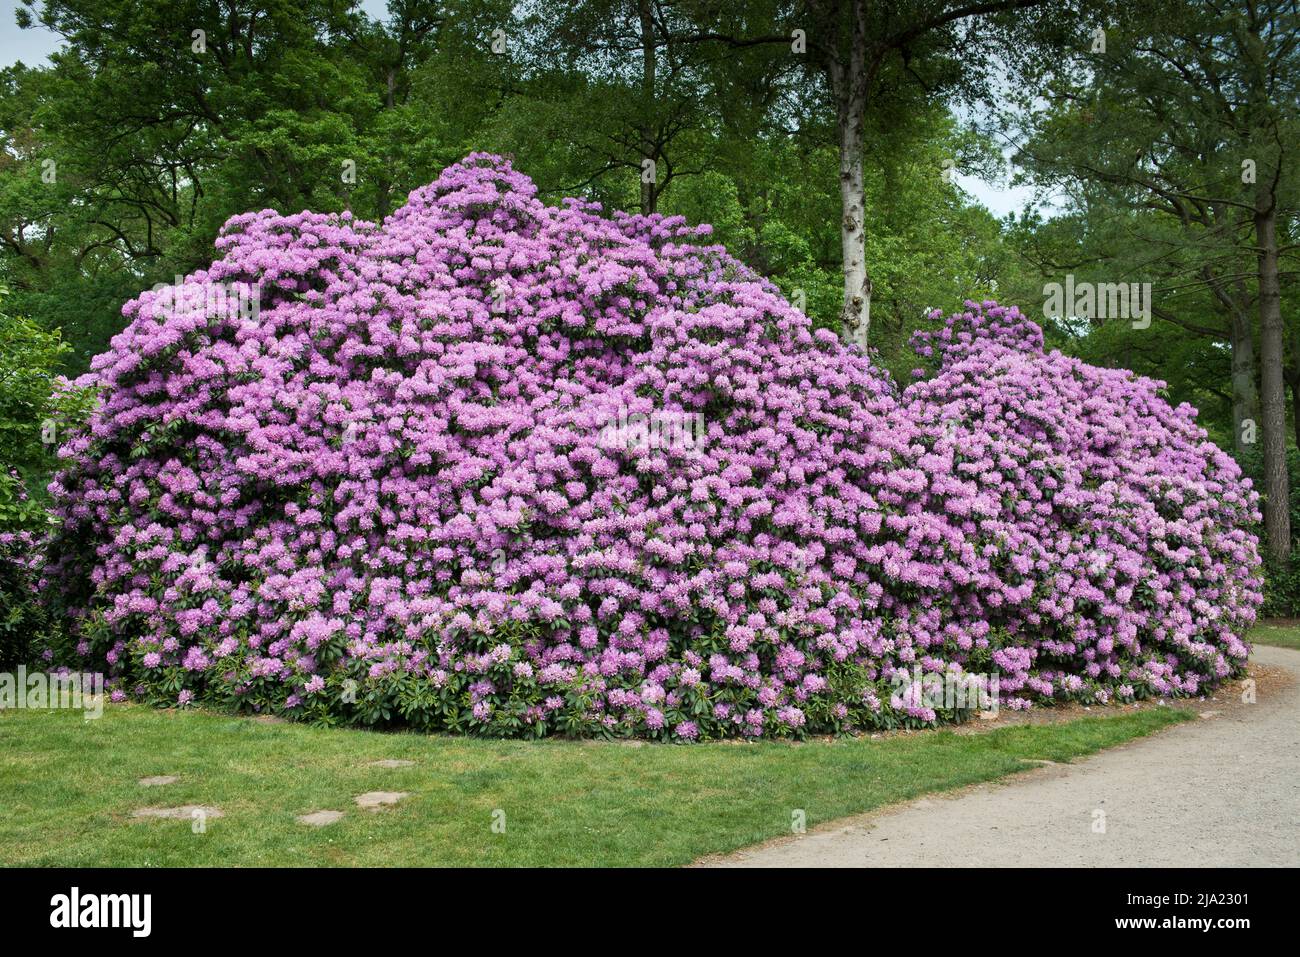 Rhododendron flowers (Rhododendron Roseum Elegans), Rhododendron Park Bremen, Germany Stock Photo